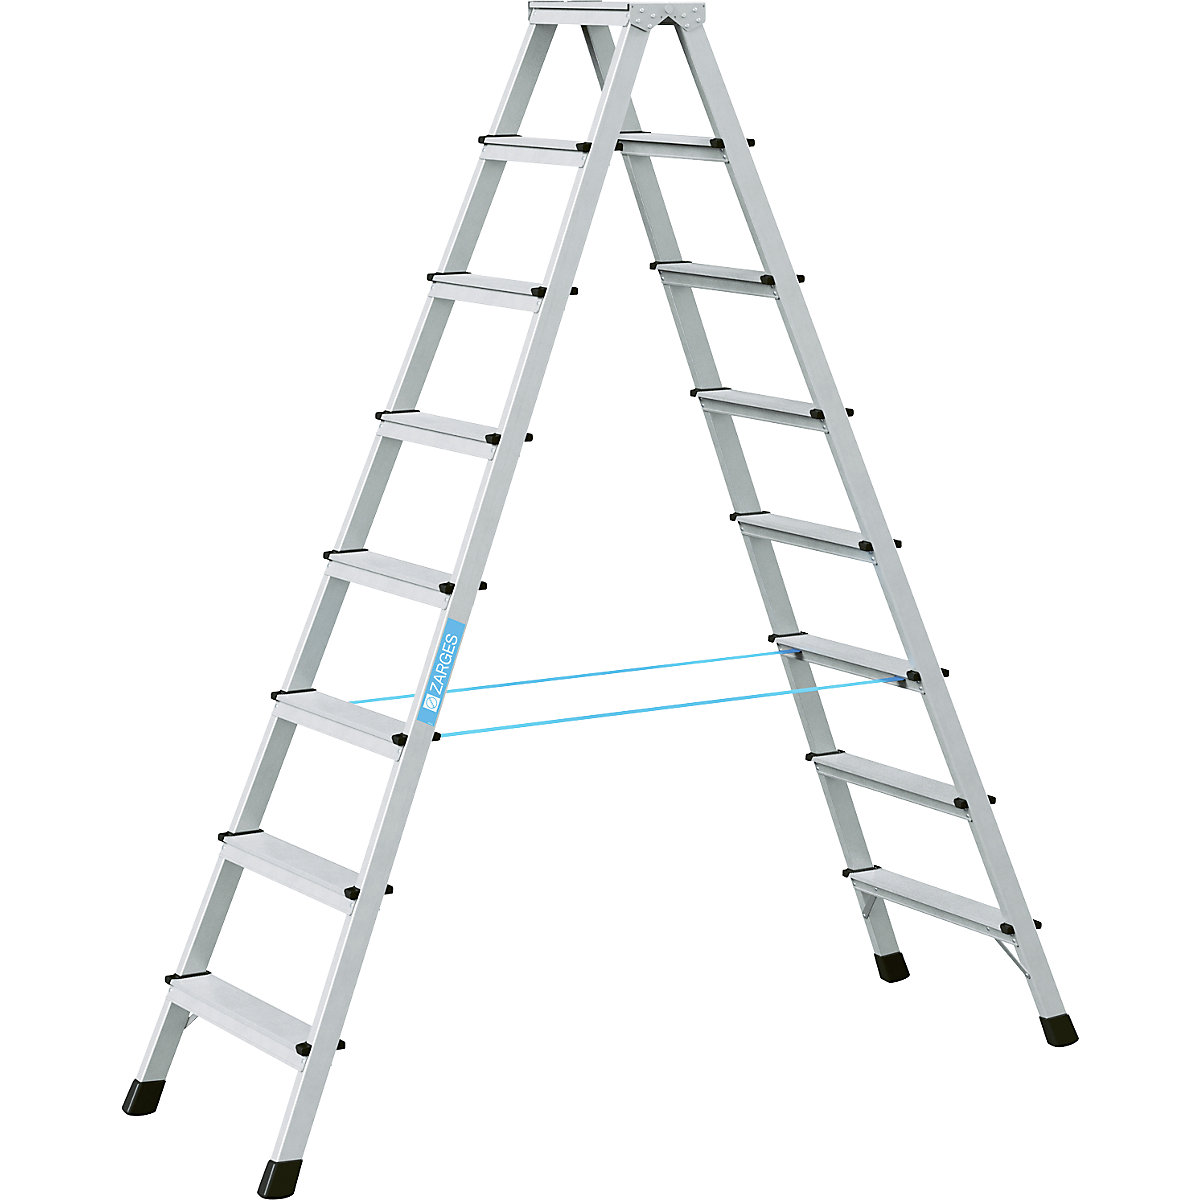 Professional step ladder, anodised – ZARGES, double sided, 2 x 8 steps-6